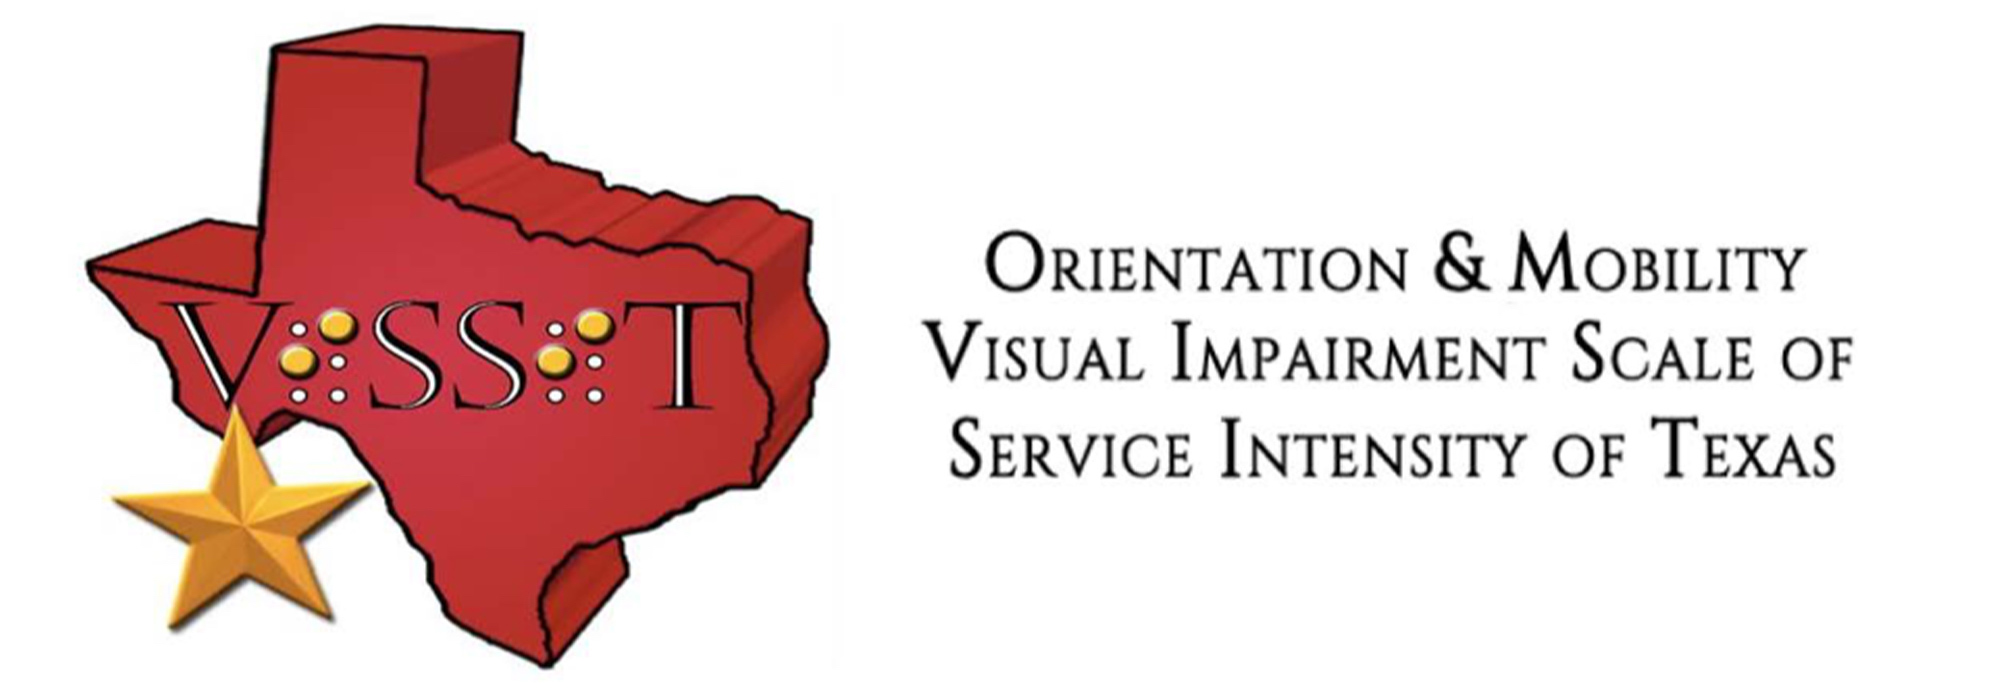 Orientation & Mobility Visual Impairment Scale of Service Intensity of Texas Logo